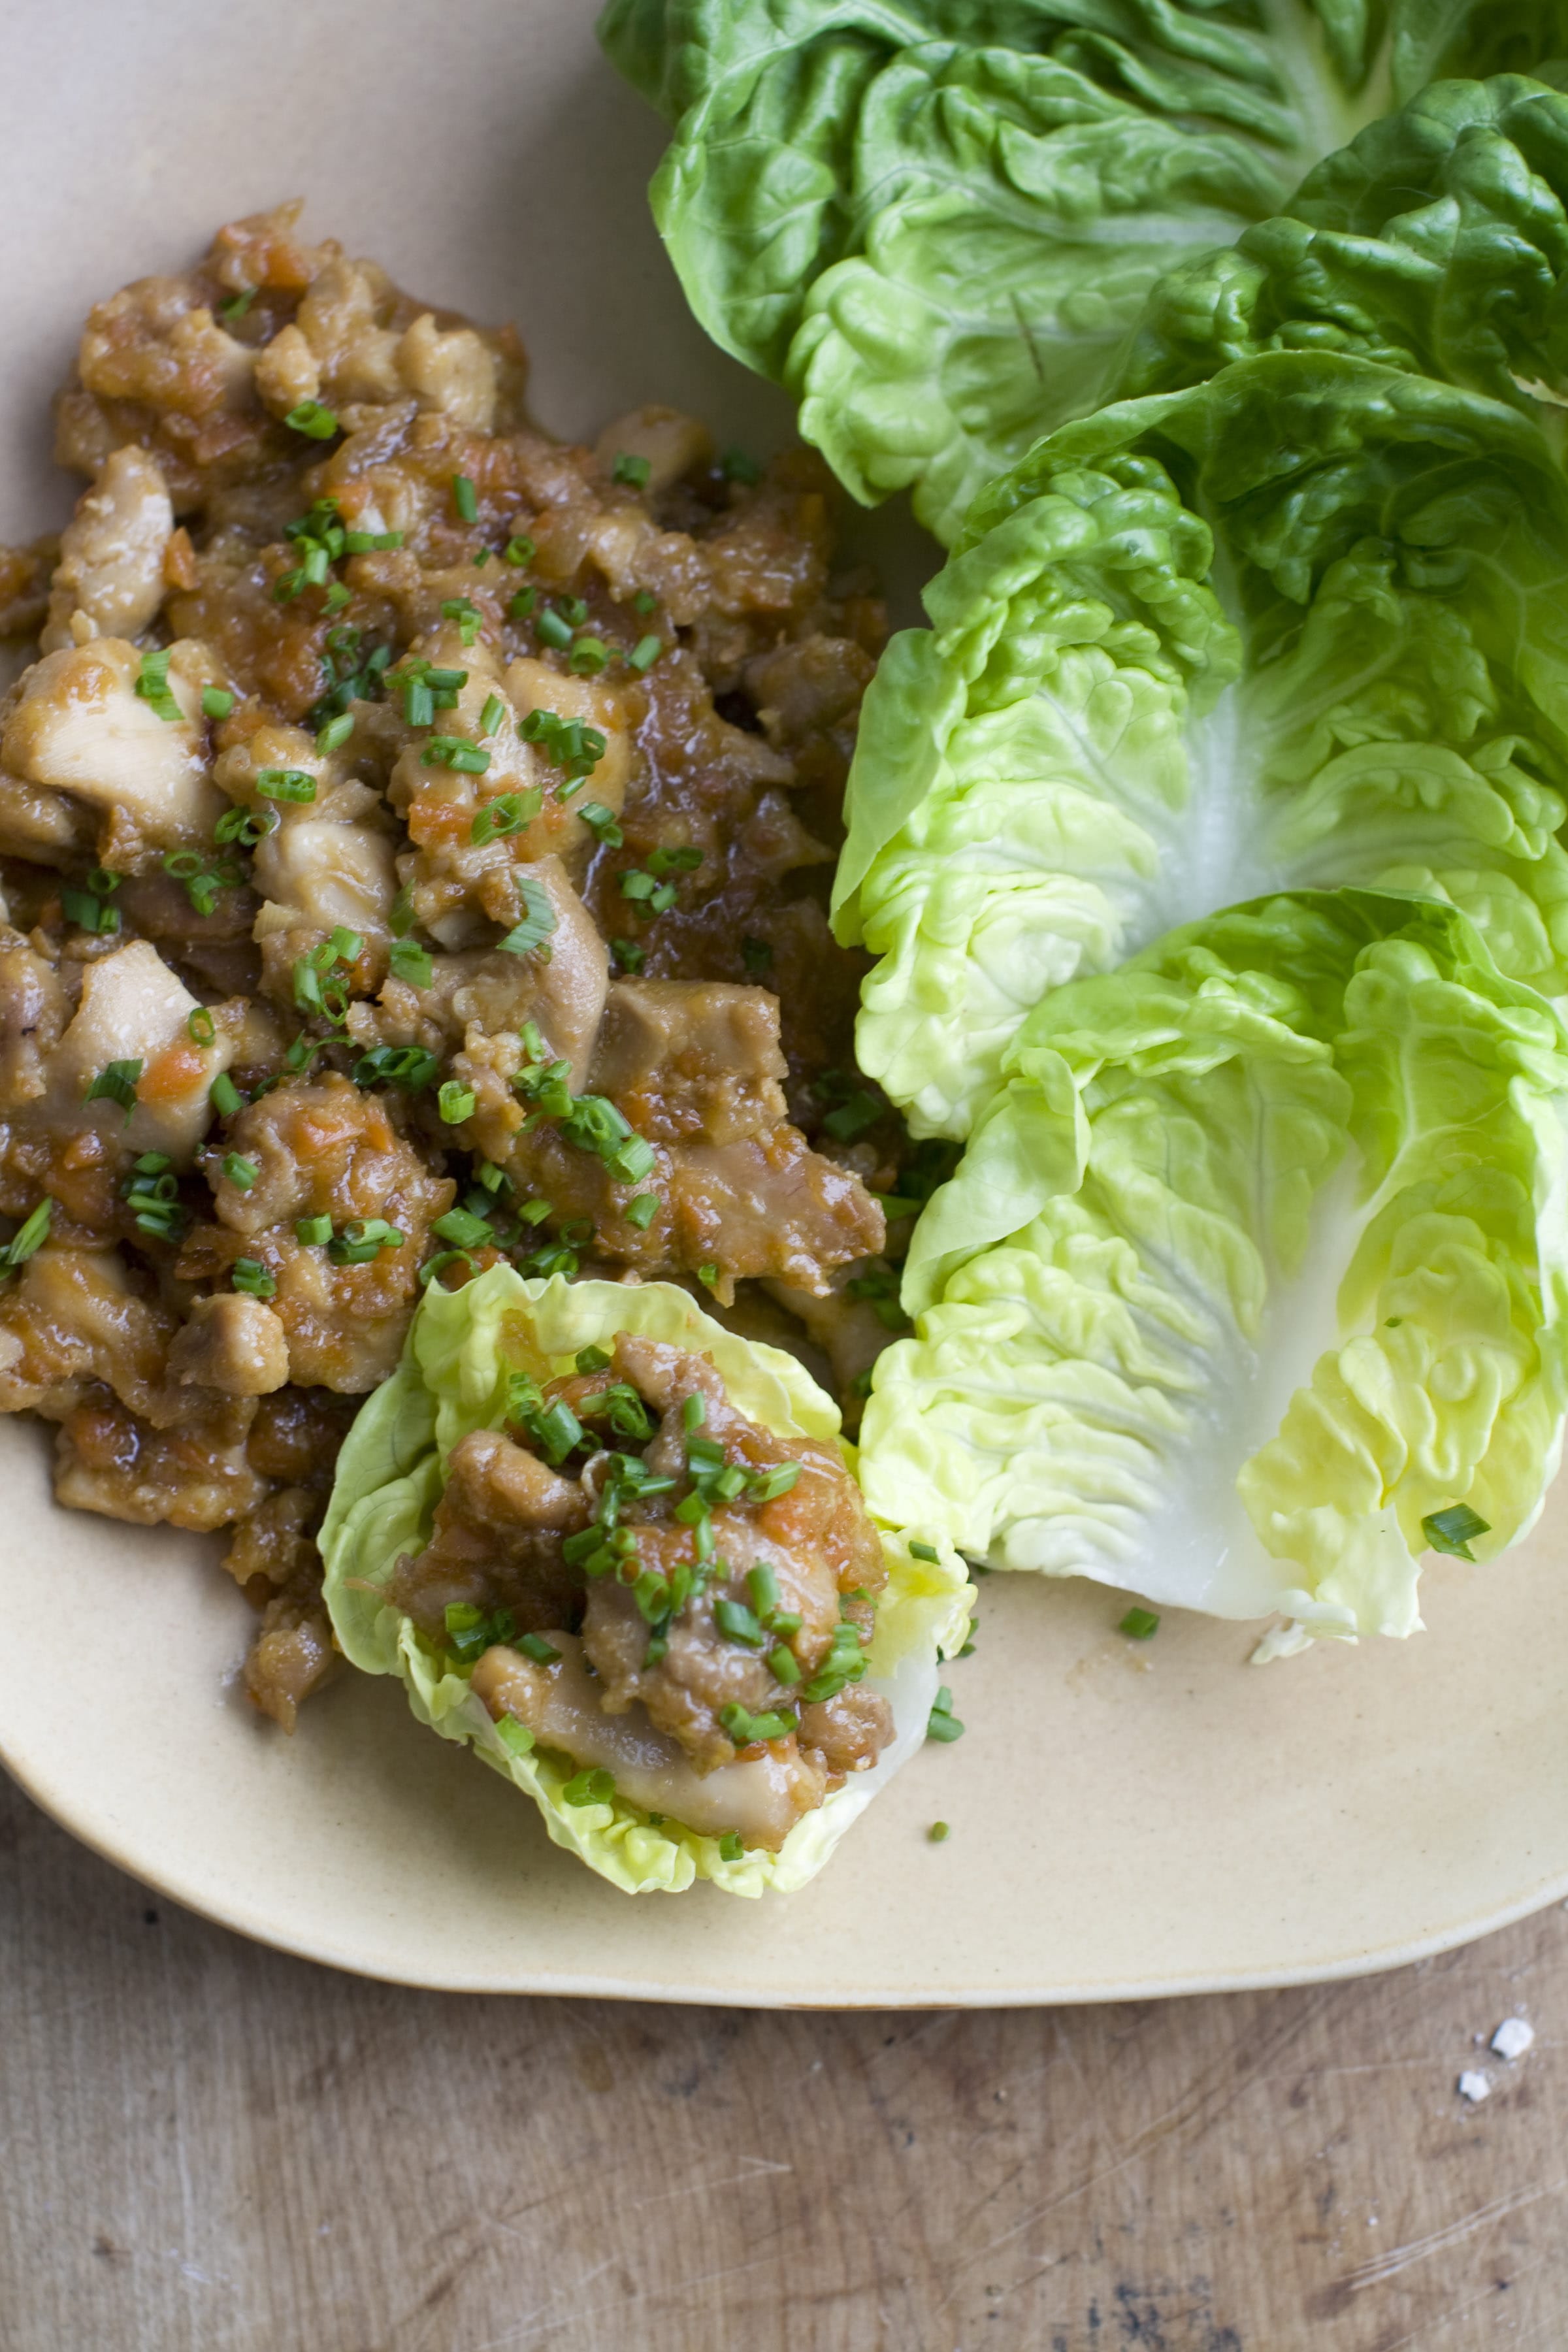 These teriyaki chicken lettuce wraps come together quickly.